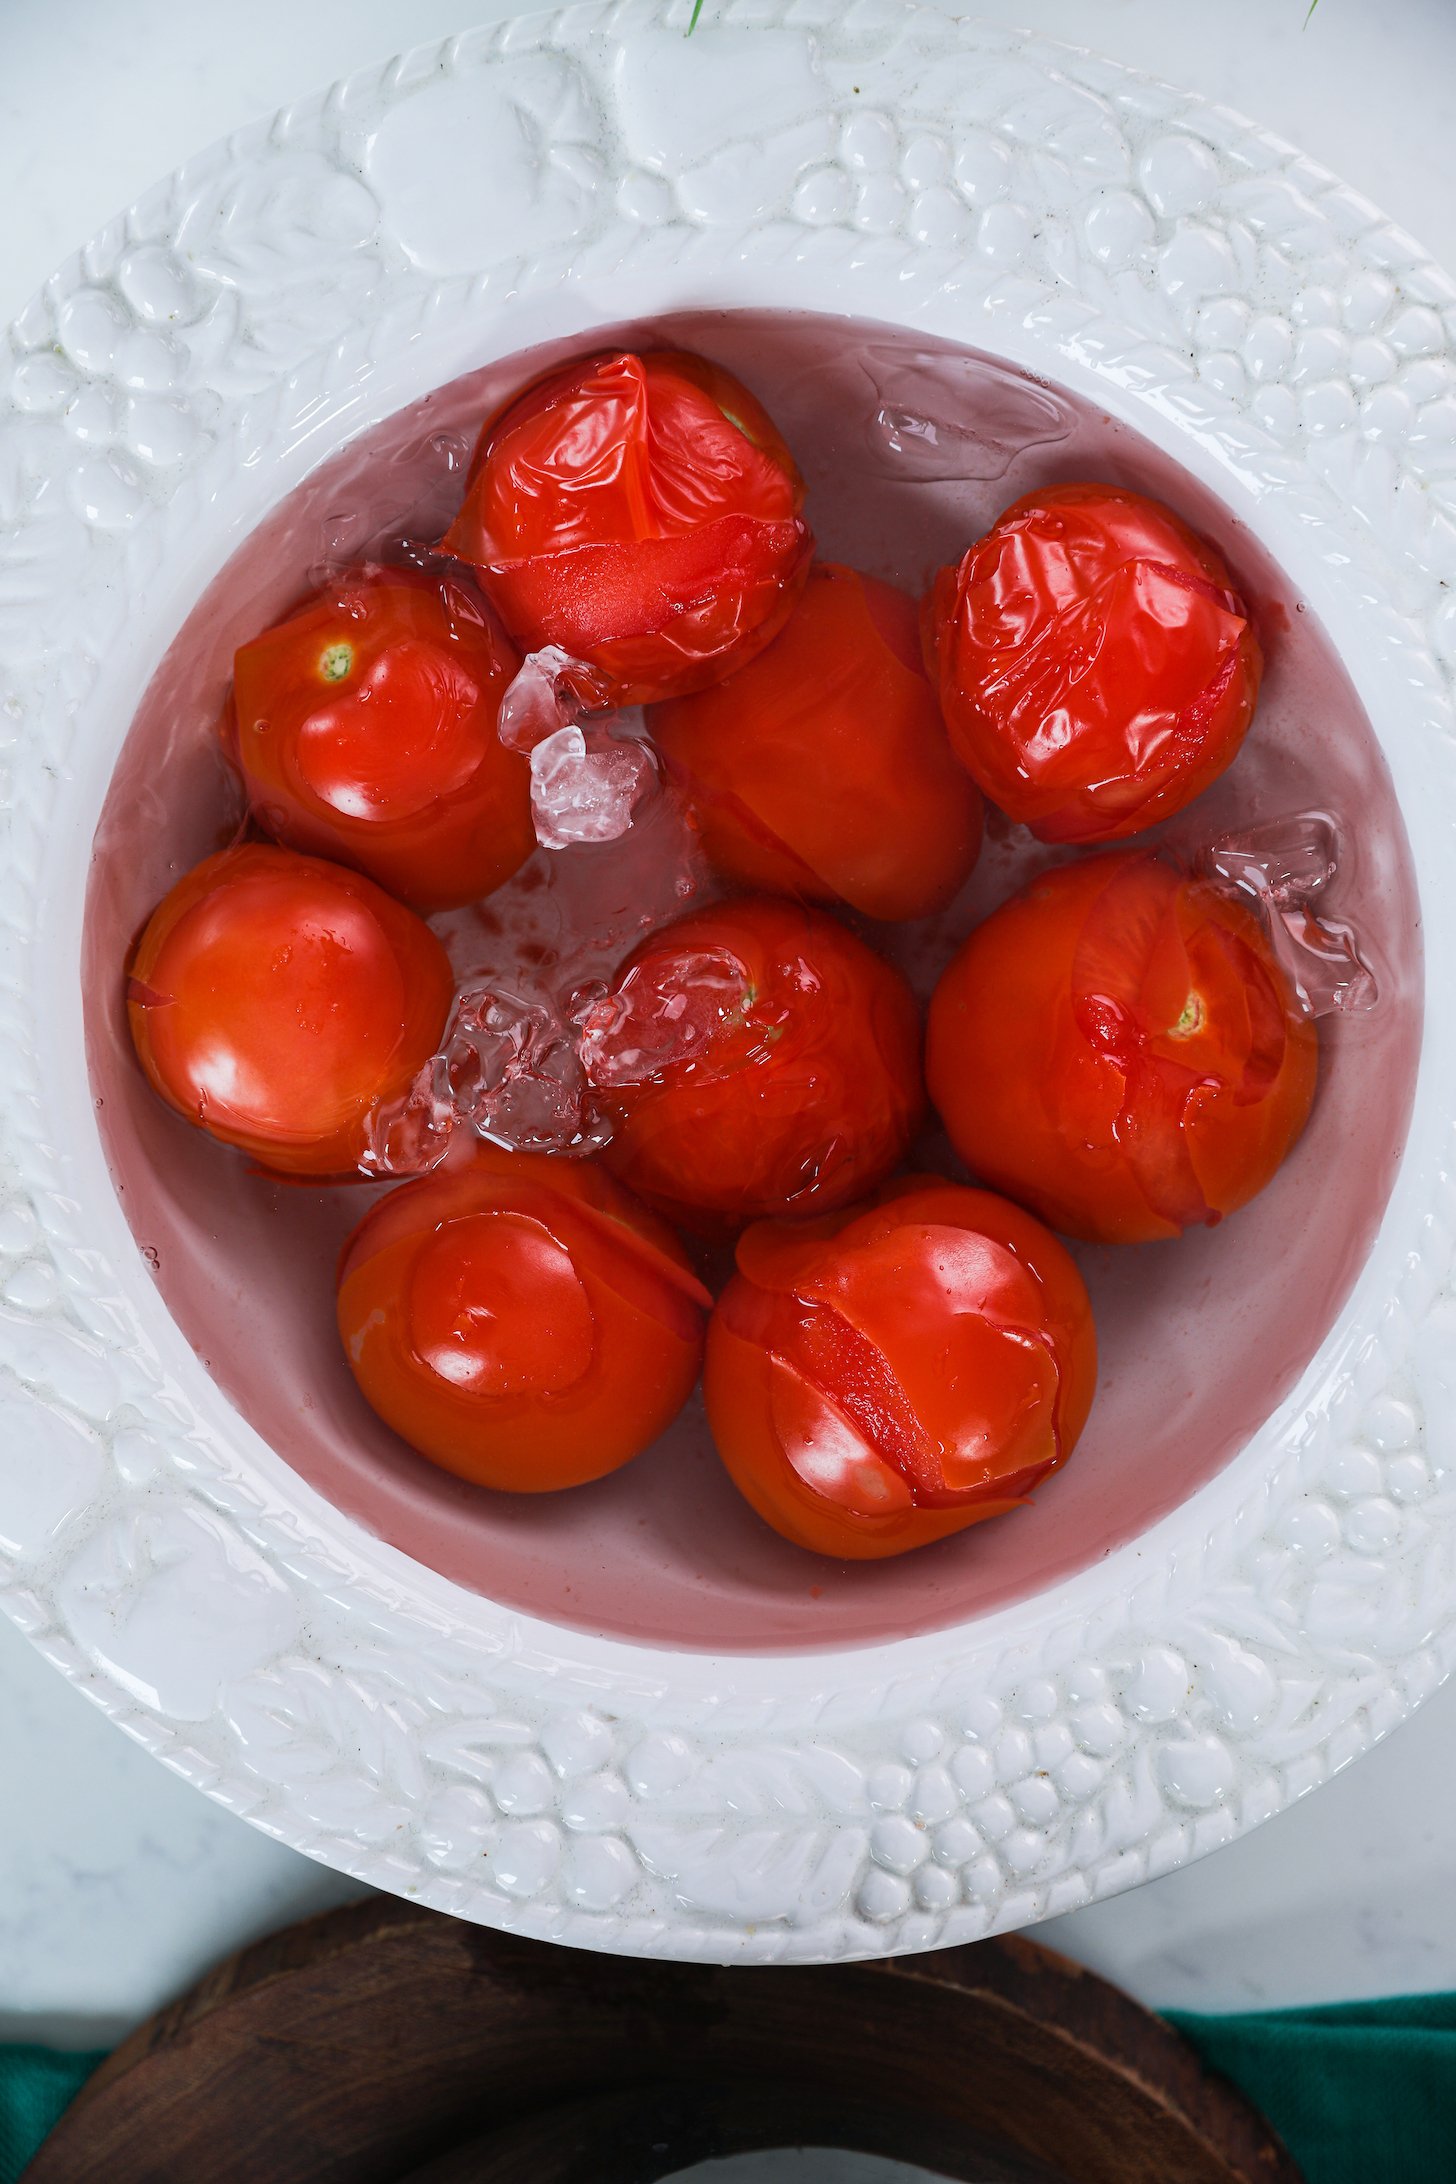 Wrinkled tomatoes submerged in a bowl of ice water.